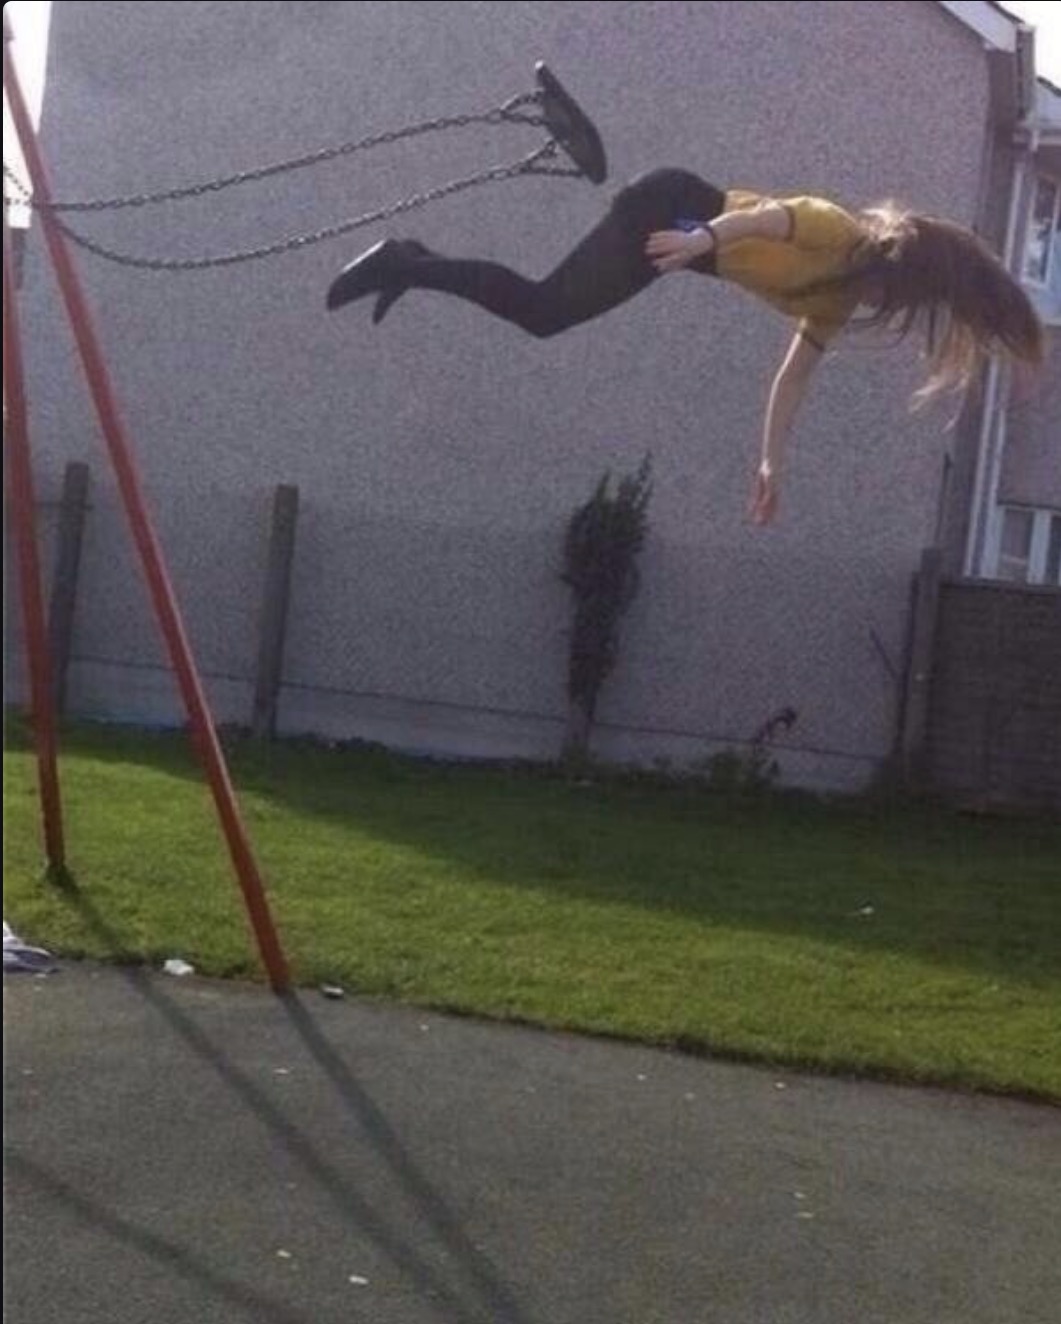 WTF image of someone loosing control on a swing.